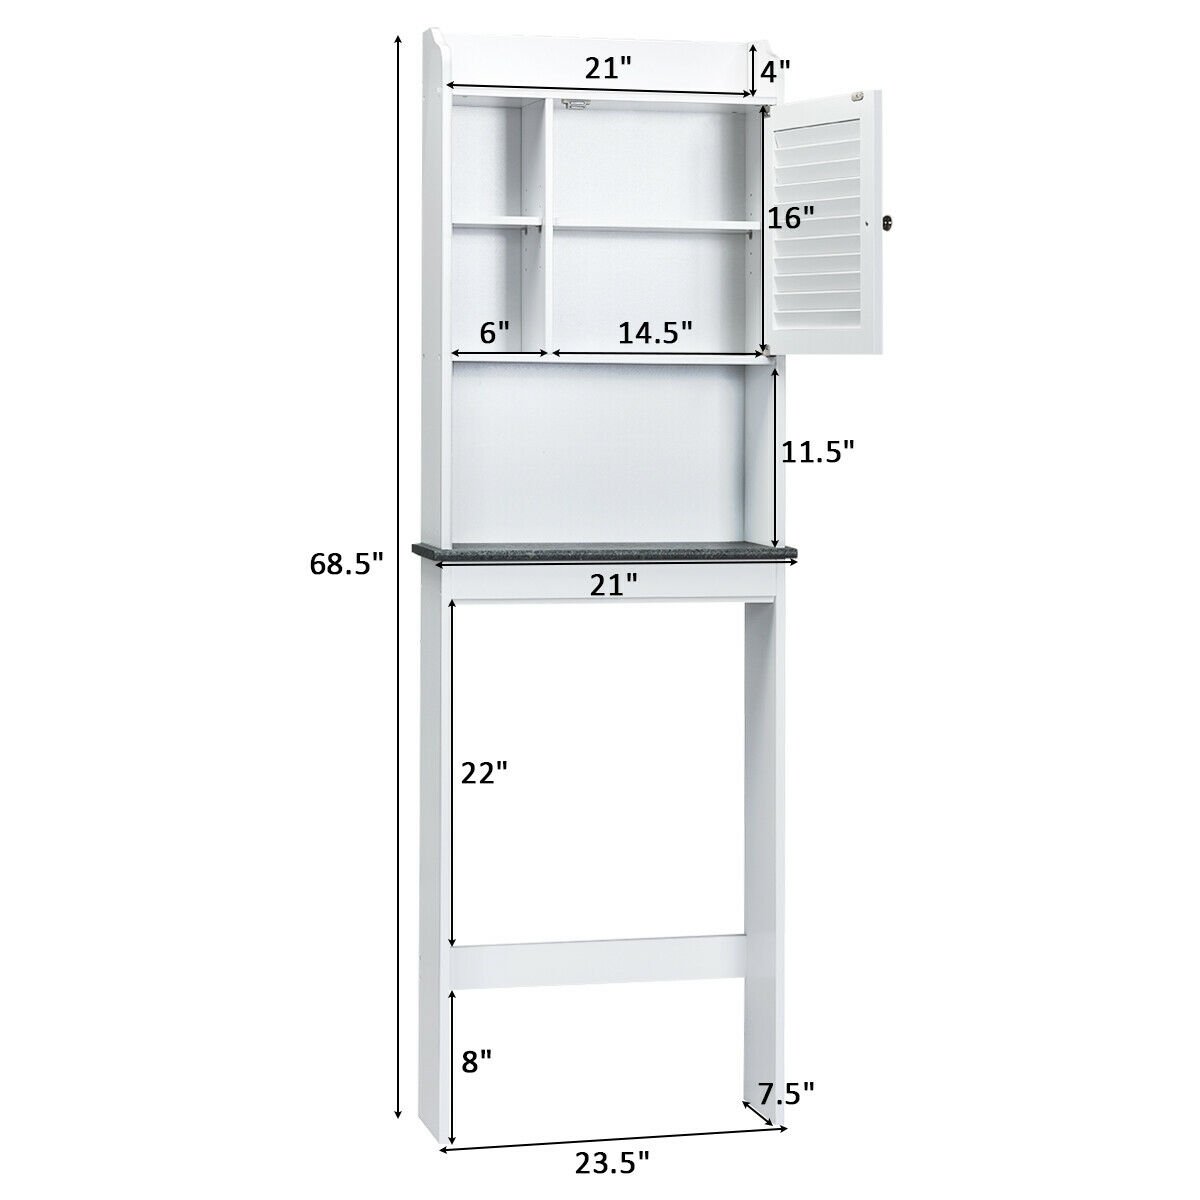 3-Tier Bathroom Over-the-toilet Storage Cabinet with Adjustable Shelves, White